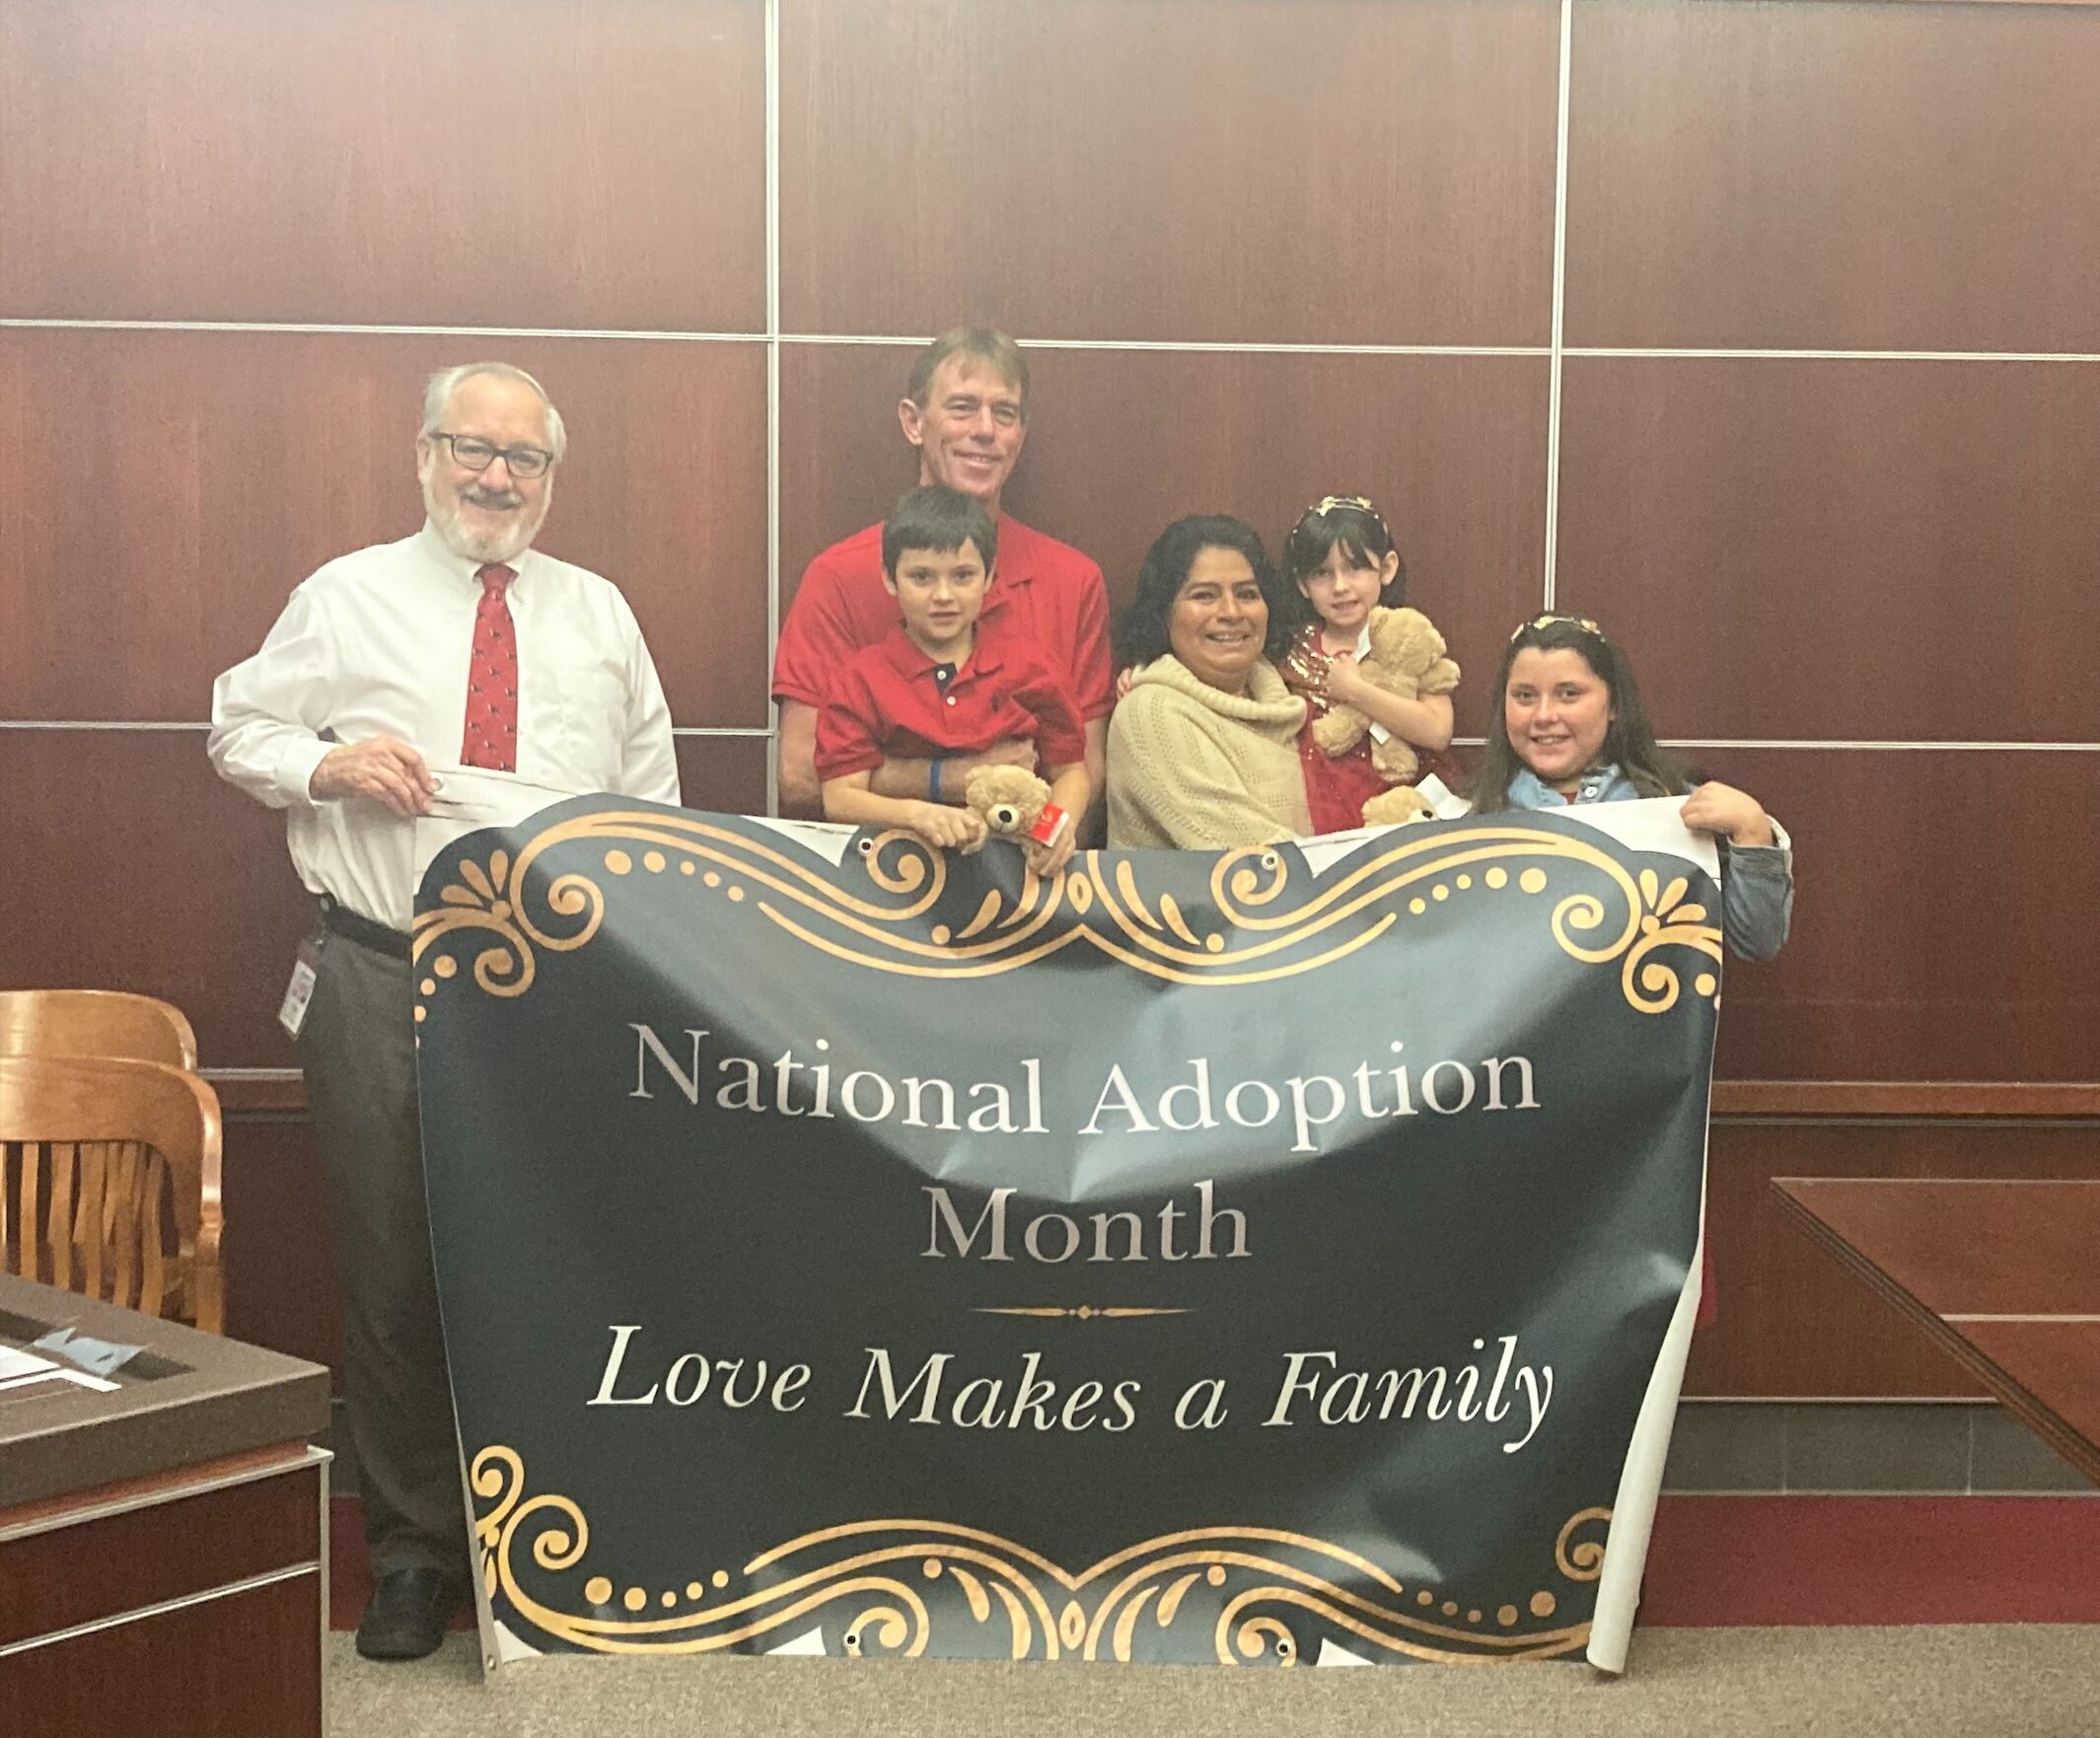 A group of six people, including two adults holding children, stand together in a courtroom. They are holding a large banner that reads "National Adoption Month: Love Makes a Family." The background features wooden paneling with some chairs and a table.